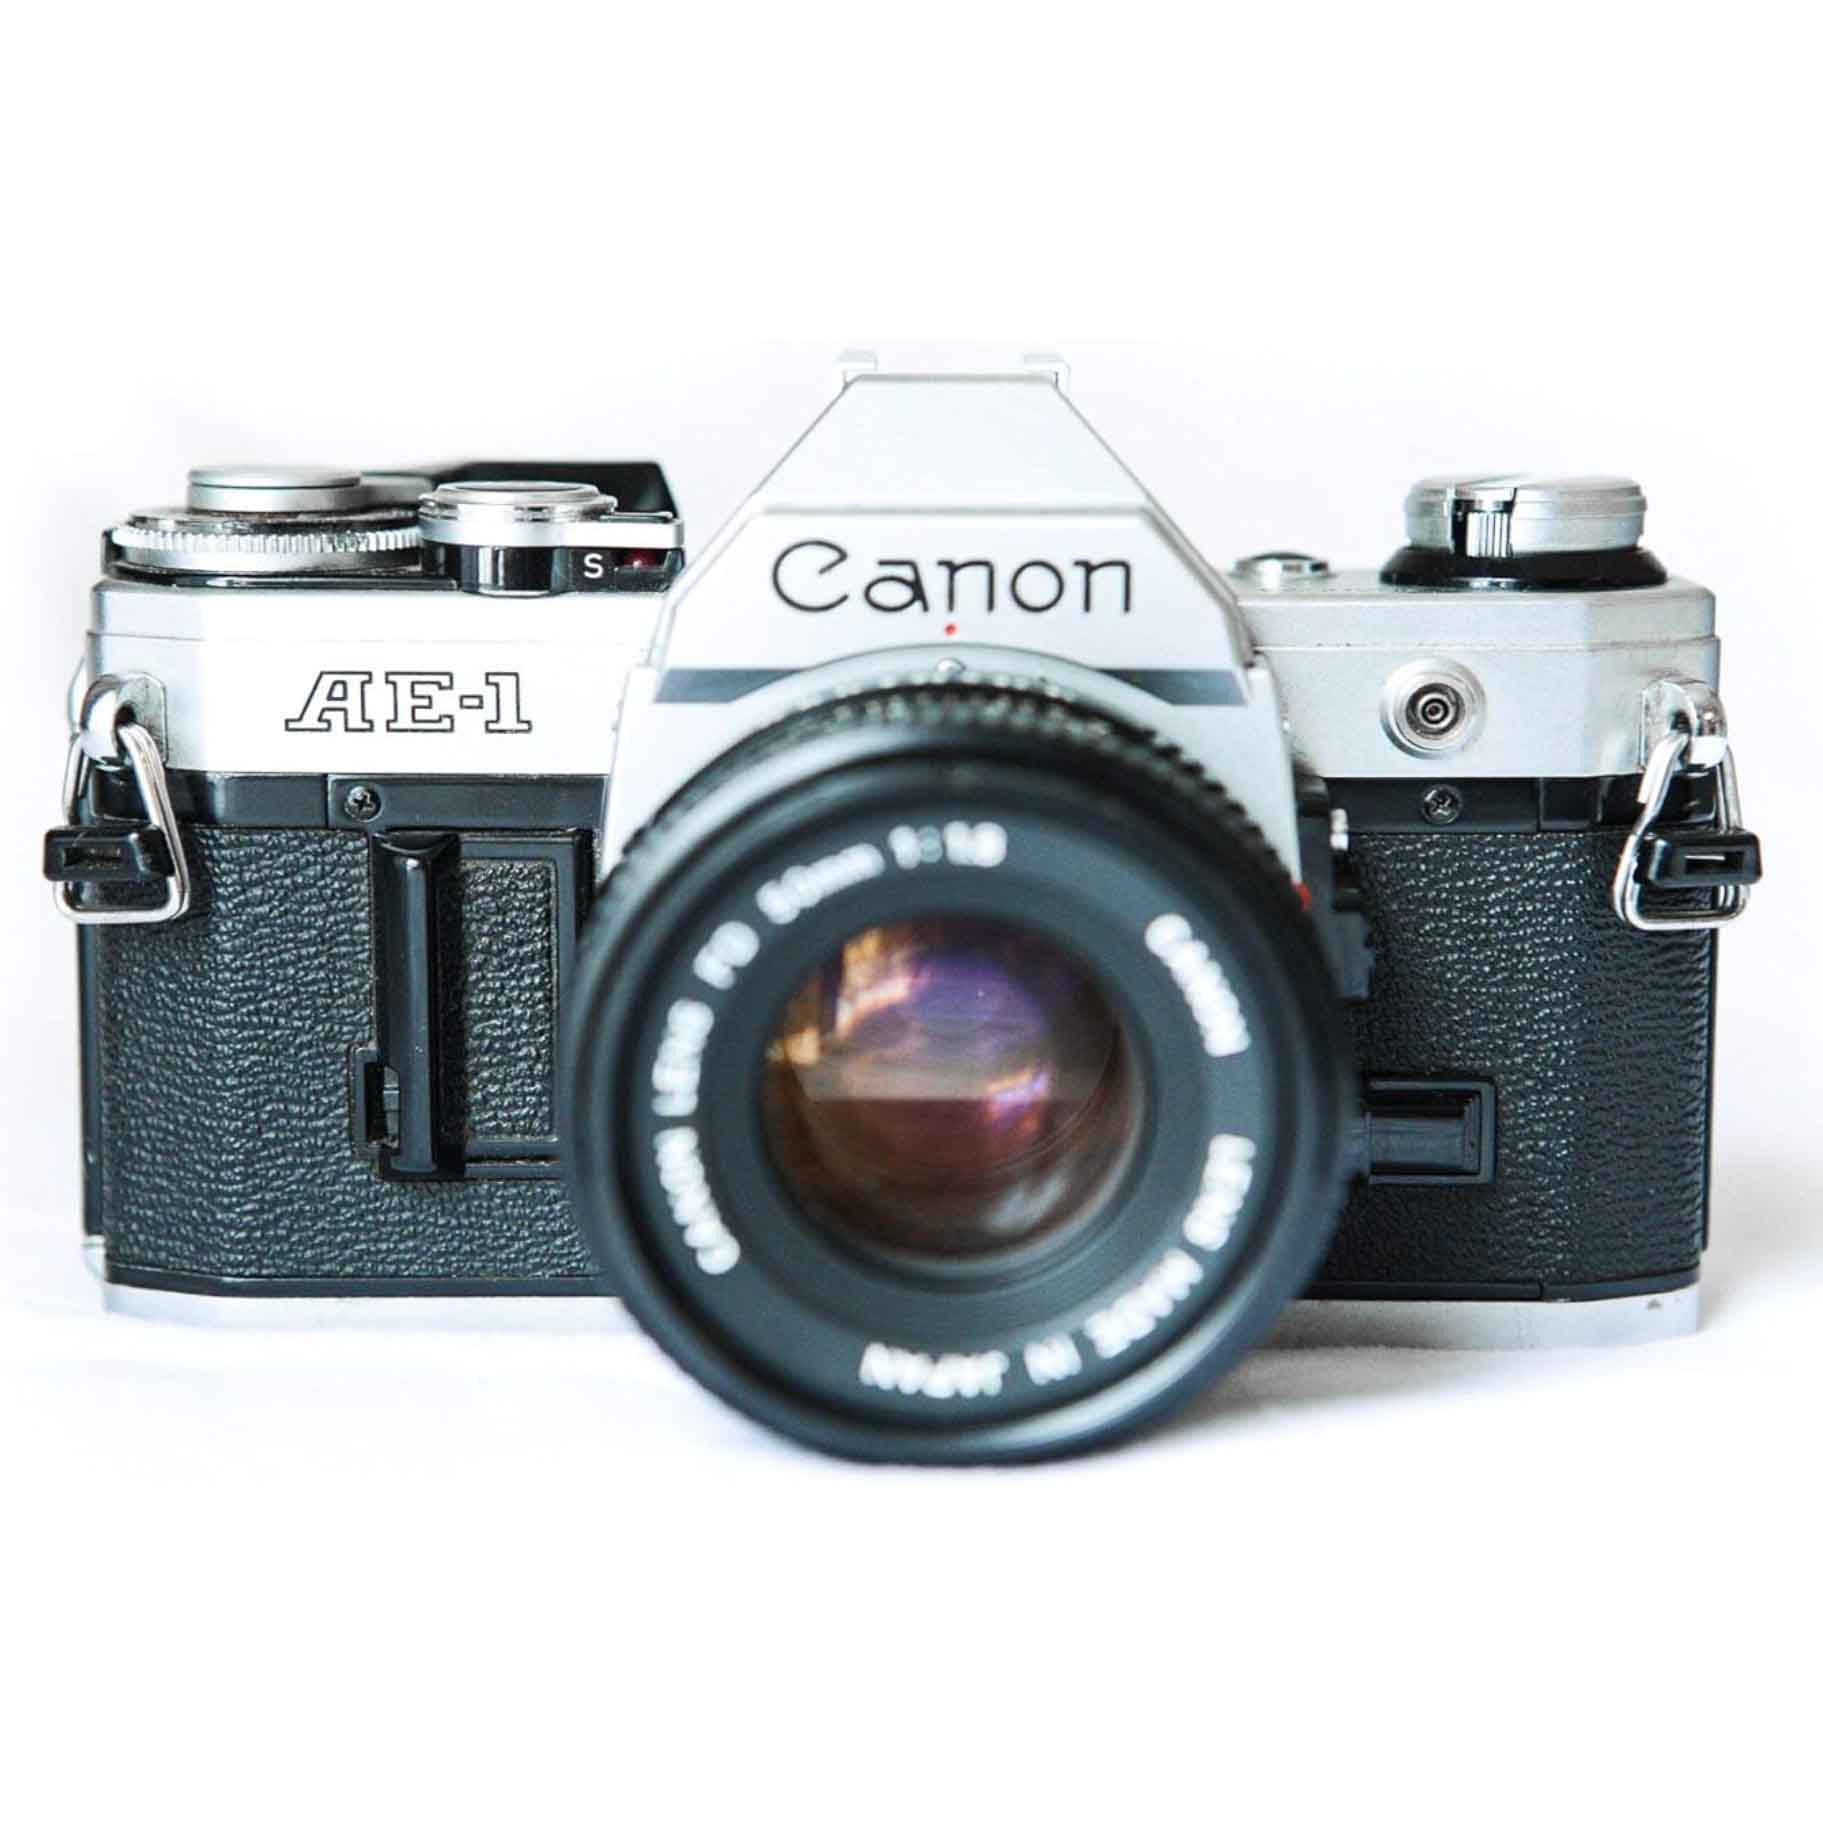 Canon AE-1 camera front view